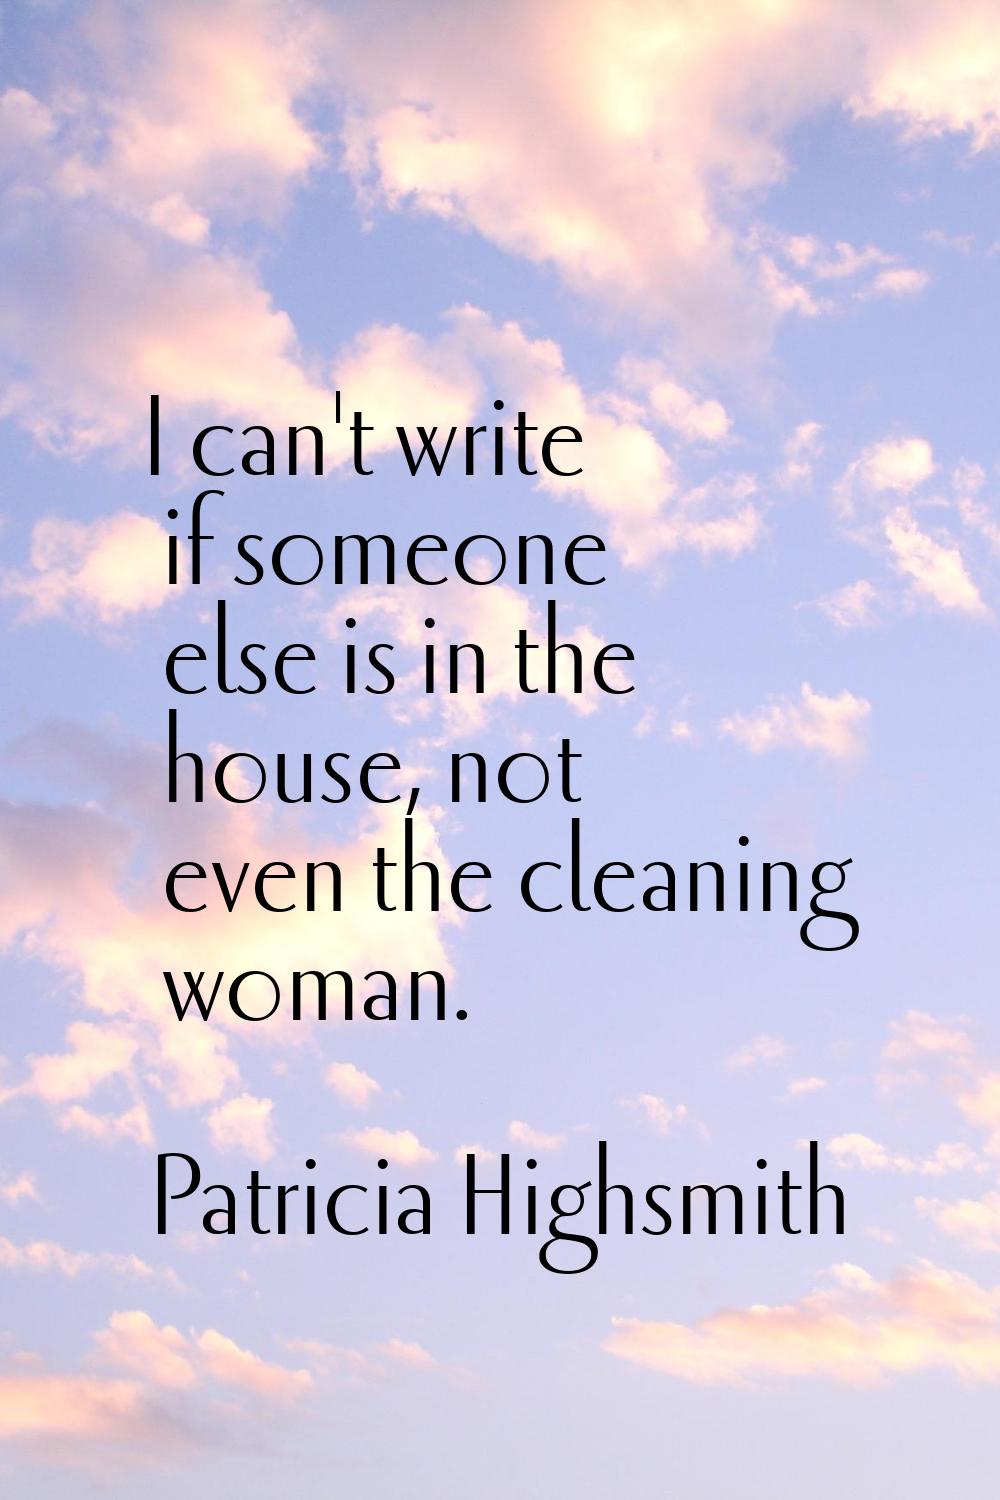 I can't write if someone else is in the house, not even the cleaning woman.